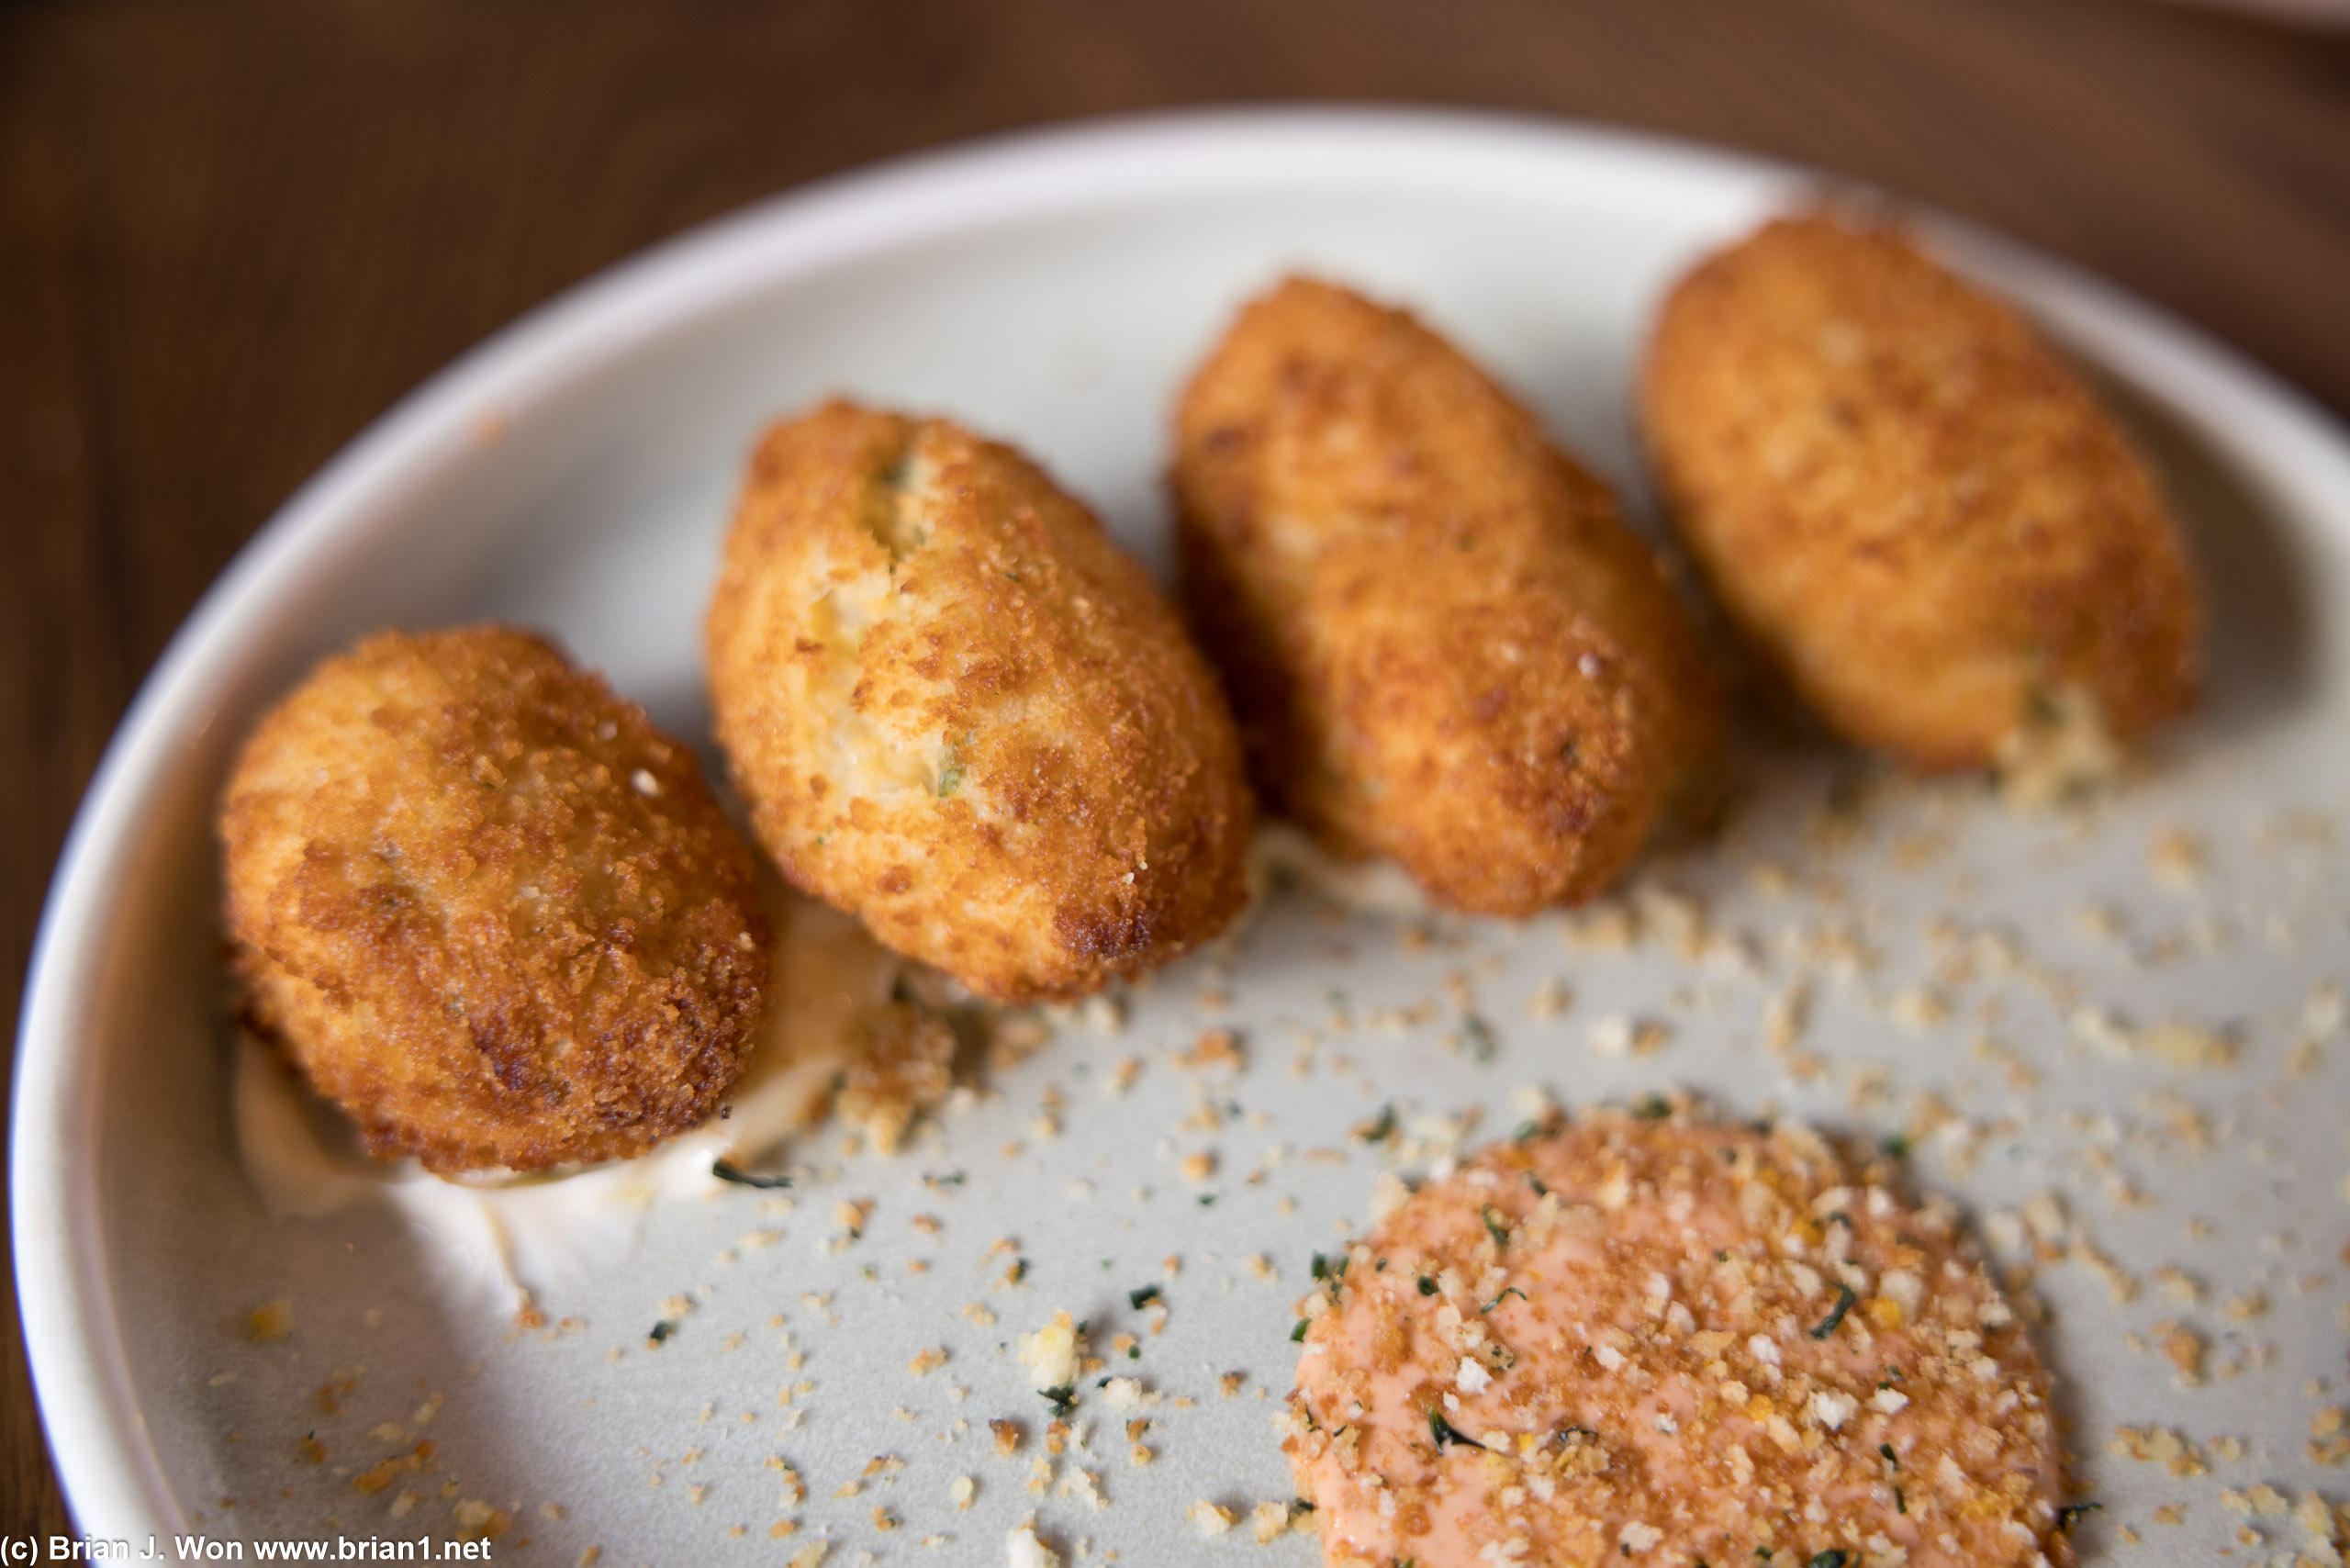 Seafood croquettes, I think.